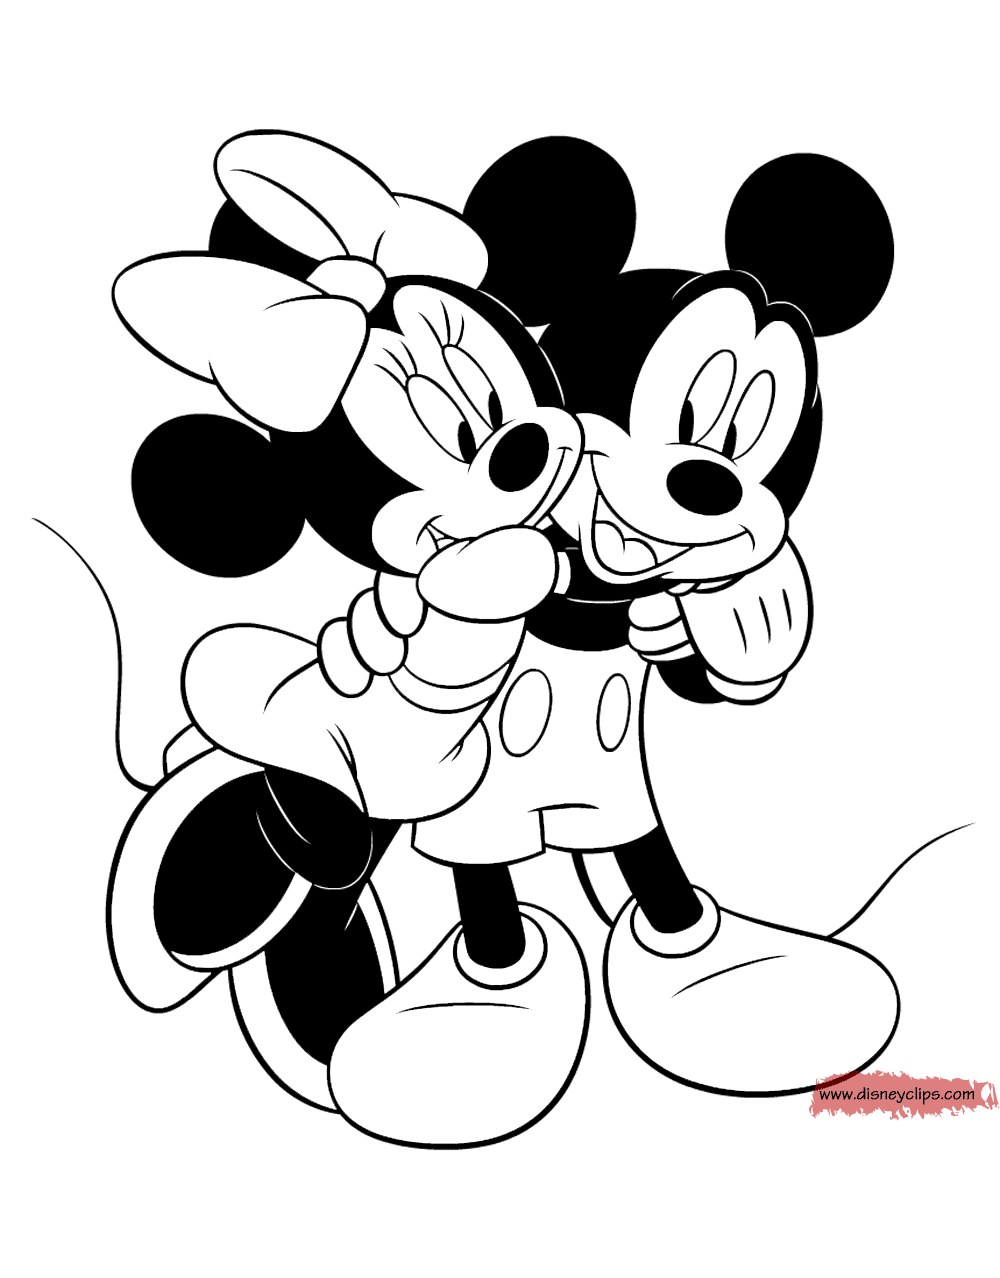 Mickey Mouse & Friends Coloring Pages | Disney Coloring Book